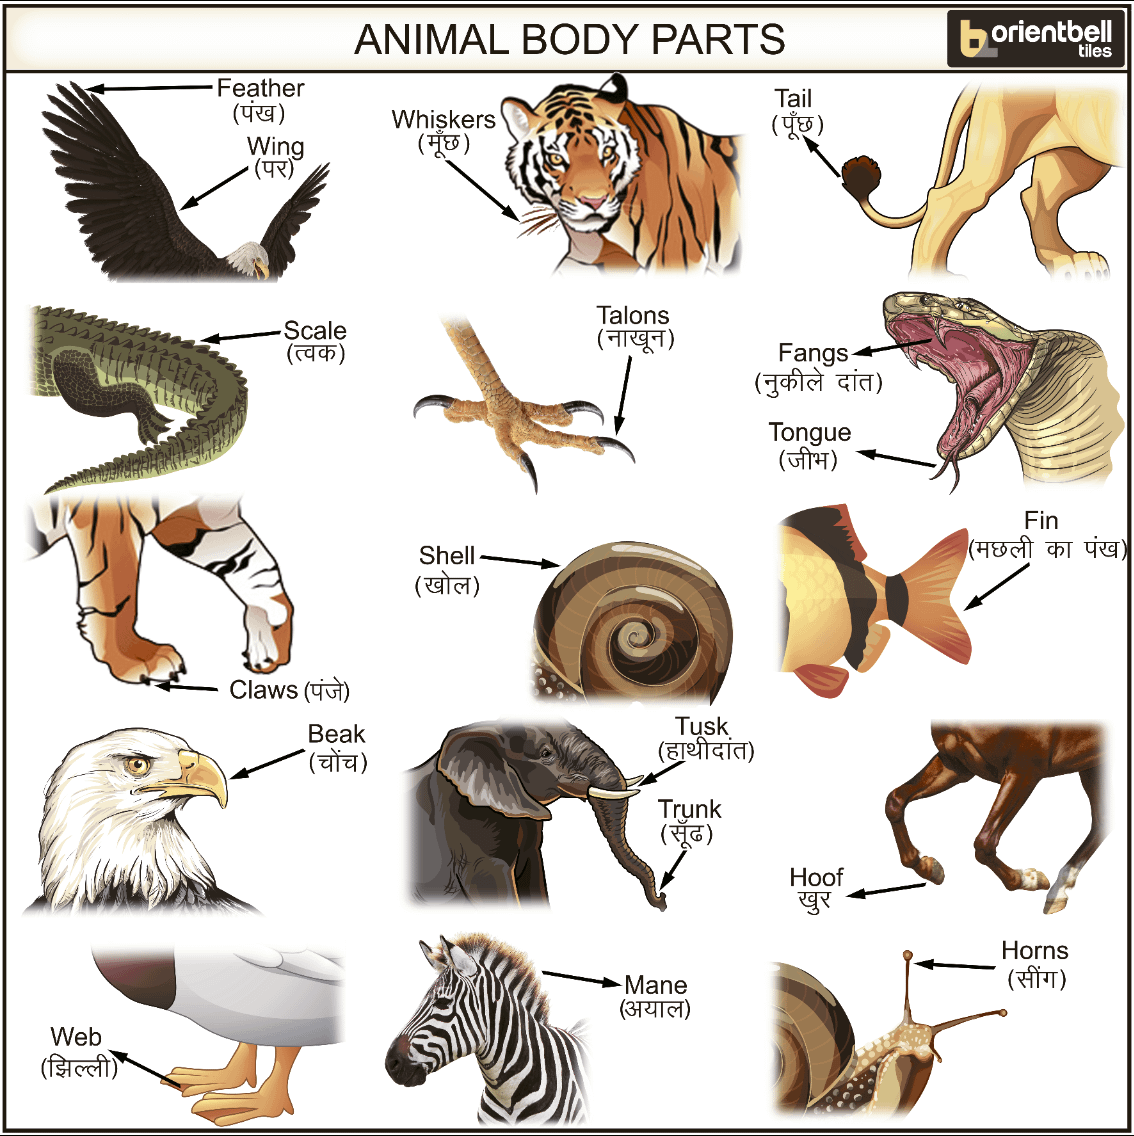 Buy Animal Body Parts Wall Tiles Online | Orientbell Tiles